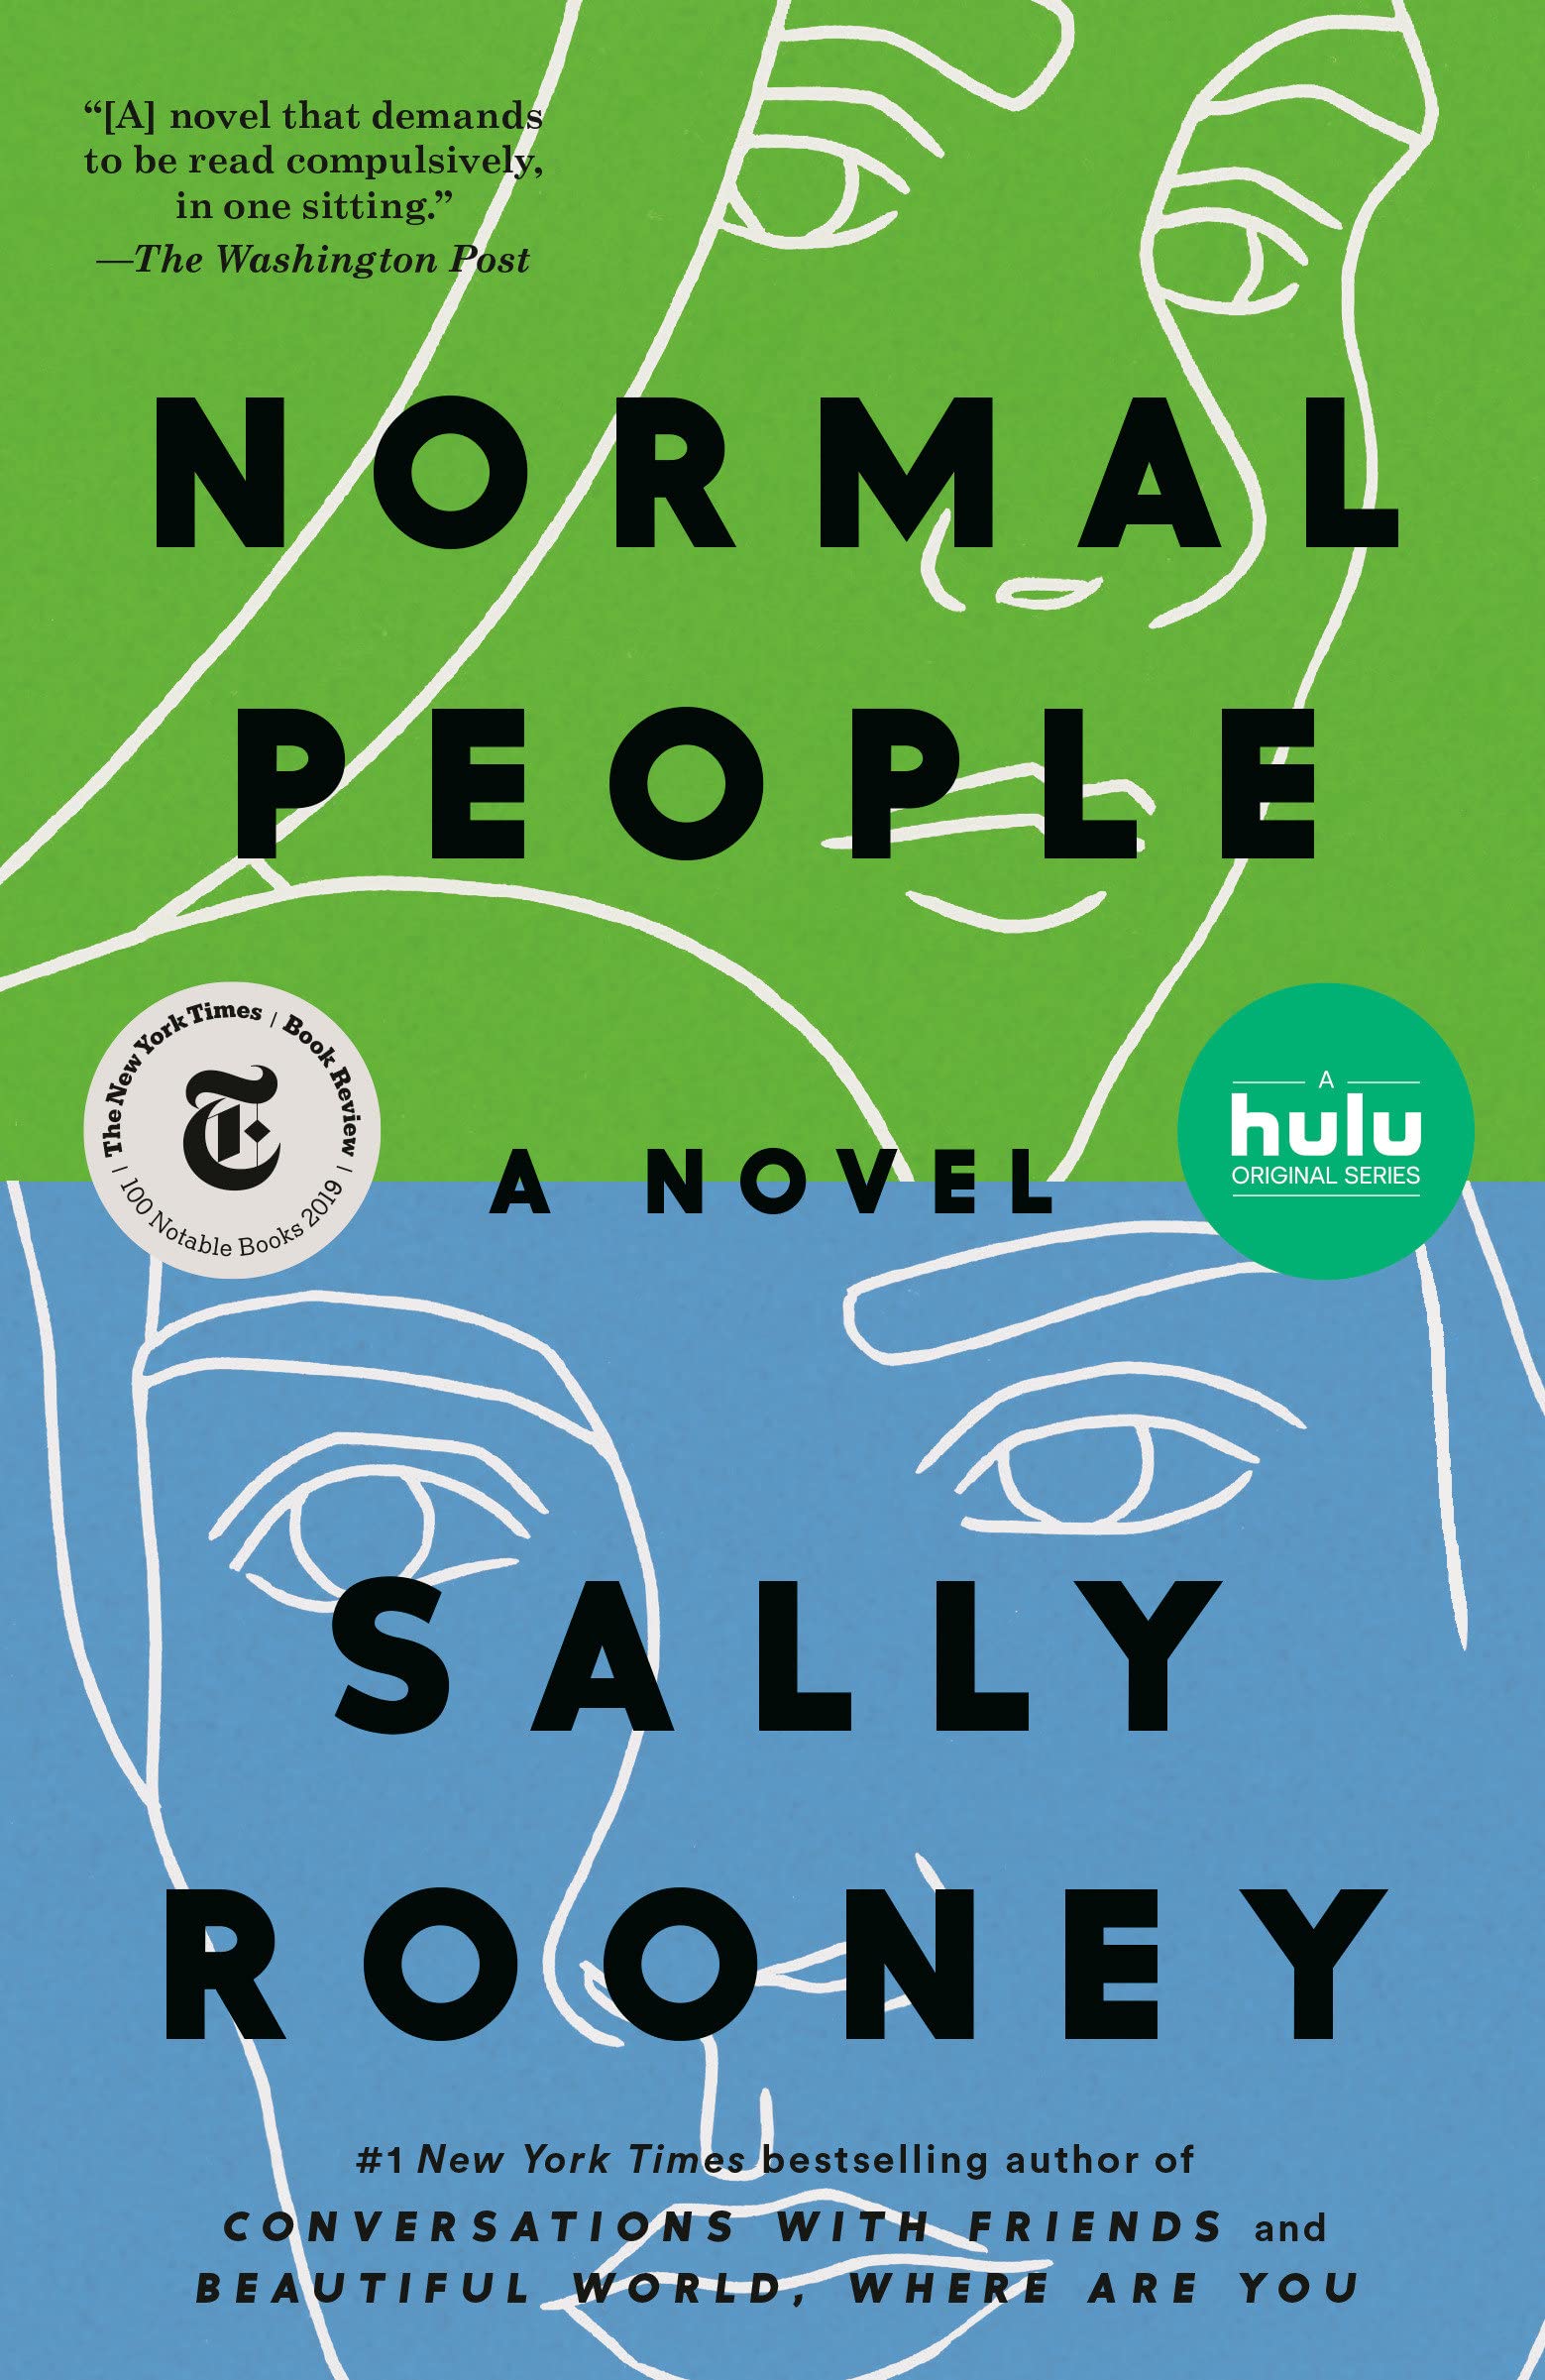 Prime Members: Select Popular Fiction Books: Normal People $6.74, The World of Ice & Fire $23.97 & More + Free S/H